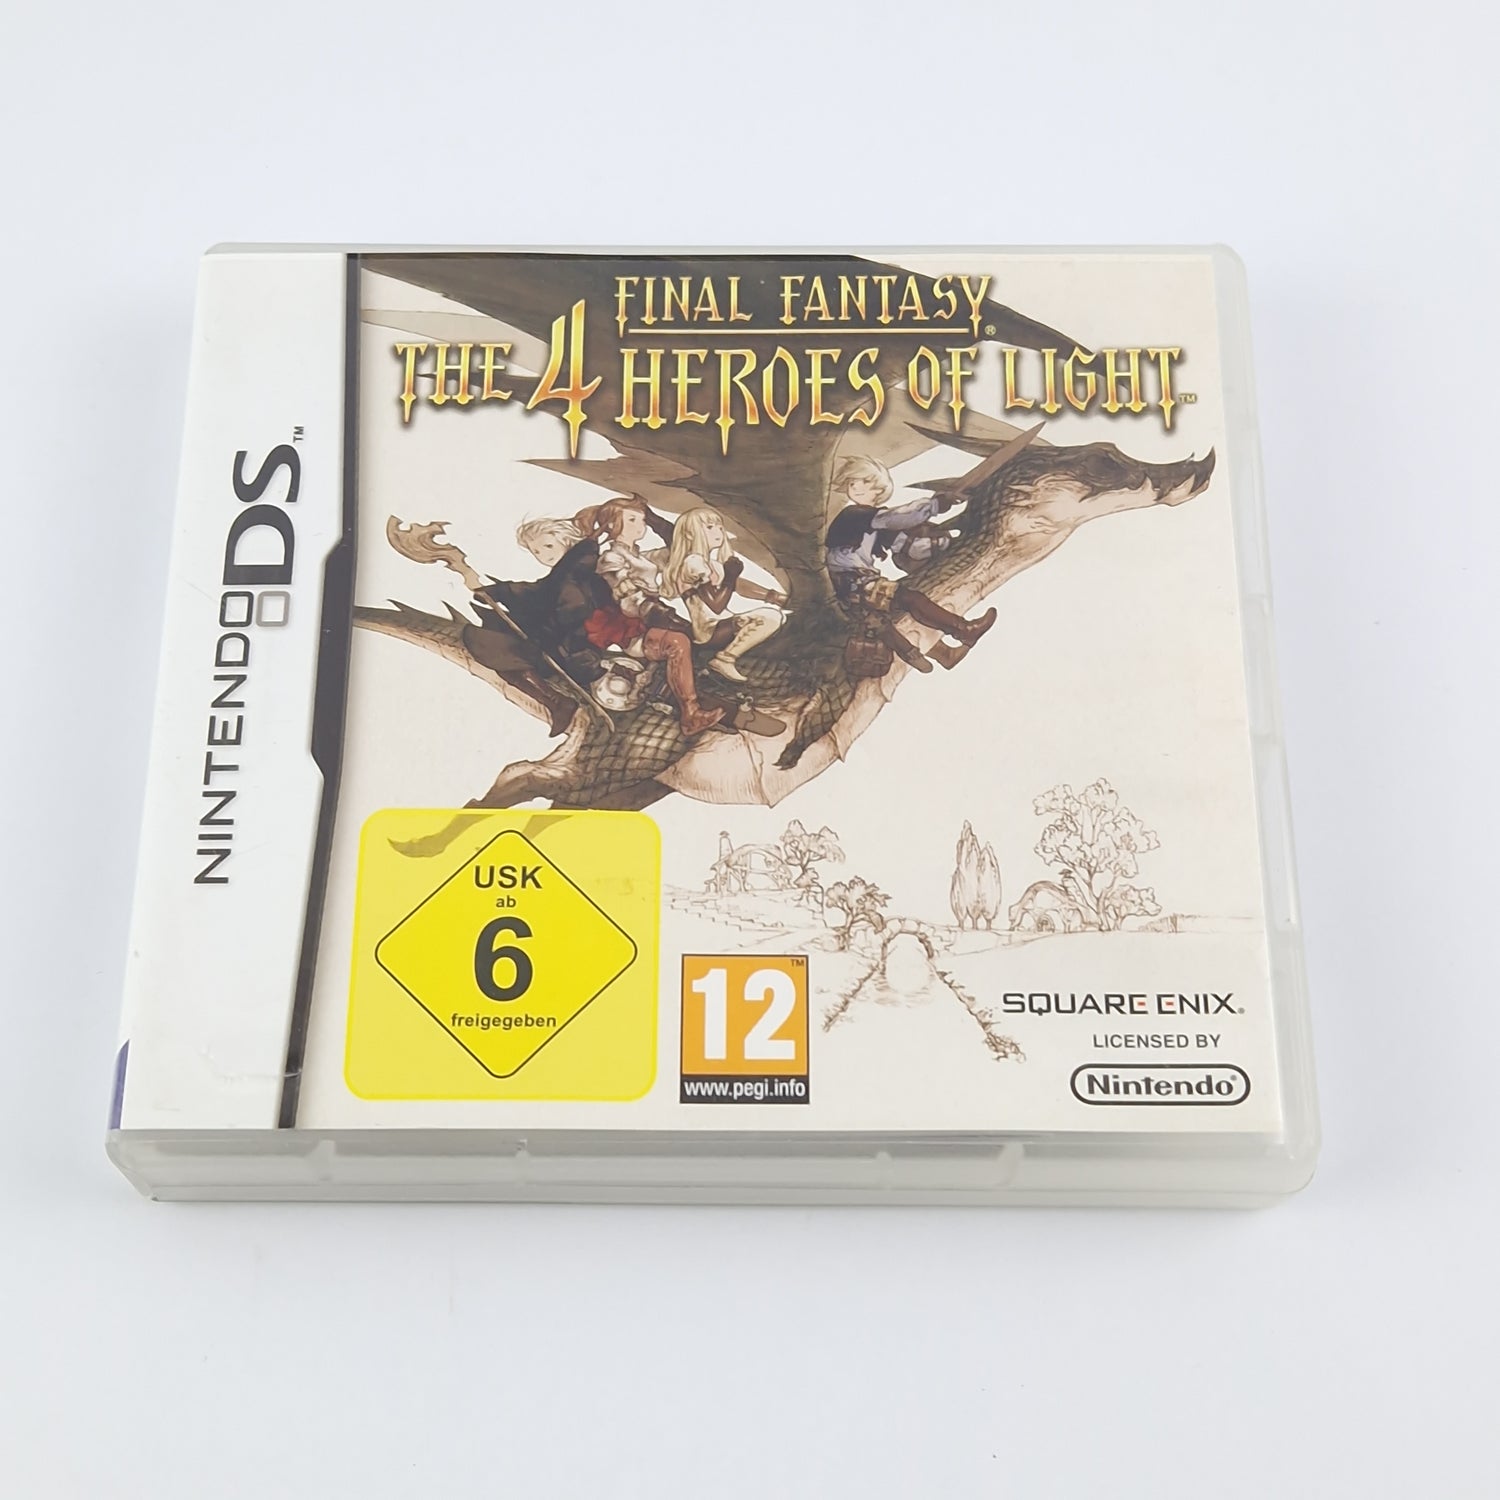 Nintendo DS Spiel : Final Fantasy The 4 Heroes of Light + Bradygames Guide